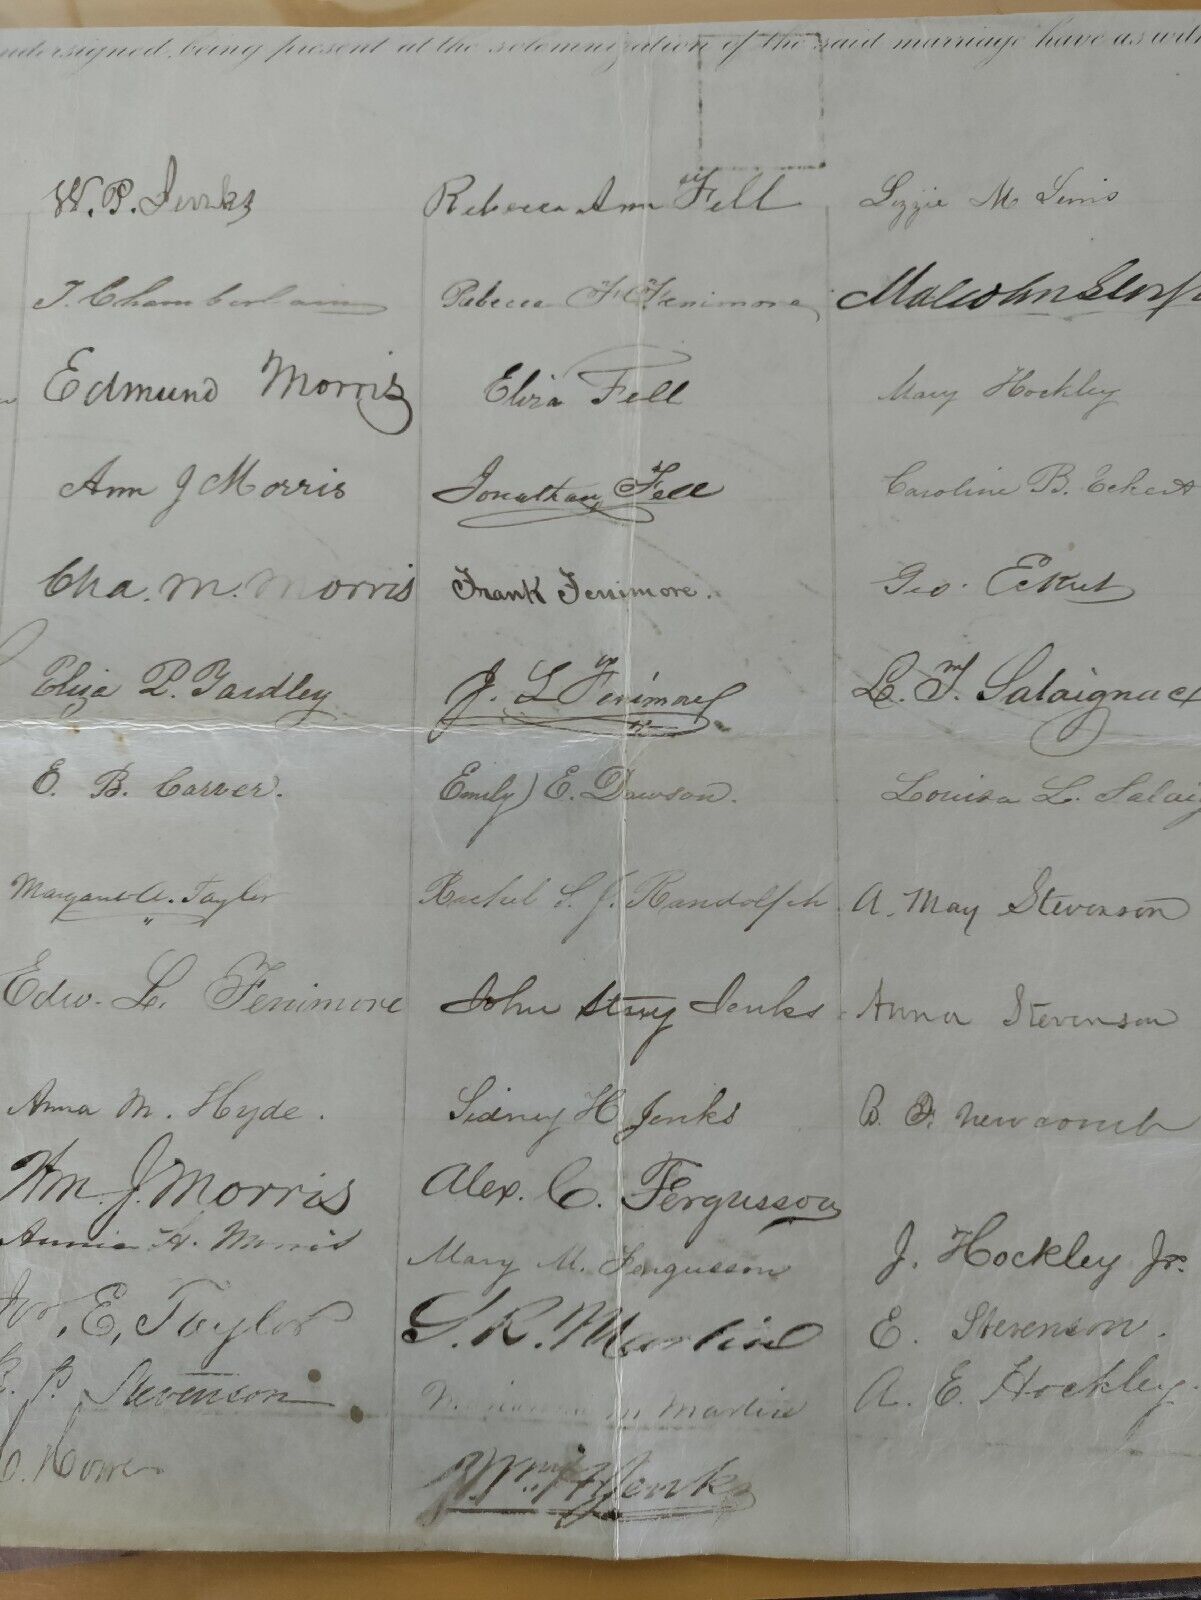 marriage certificate from 1864 with many signatures